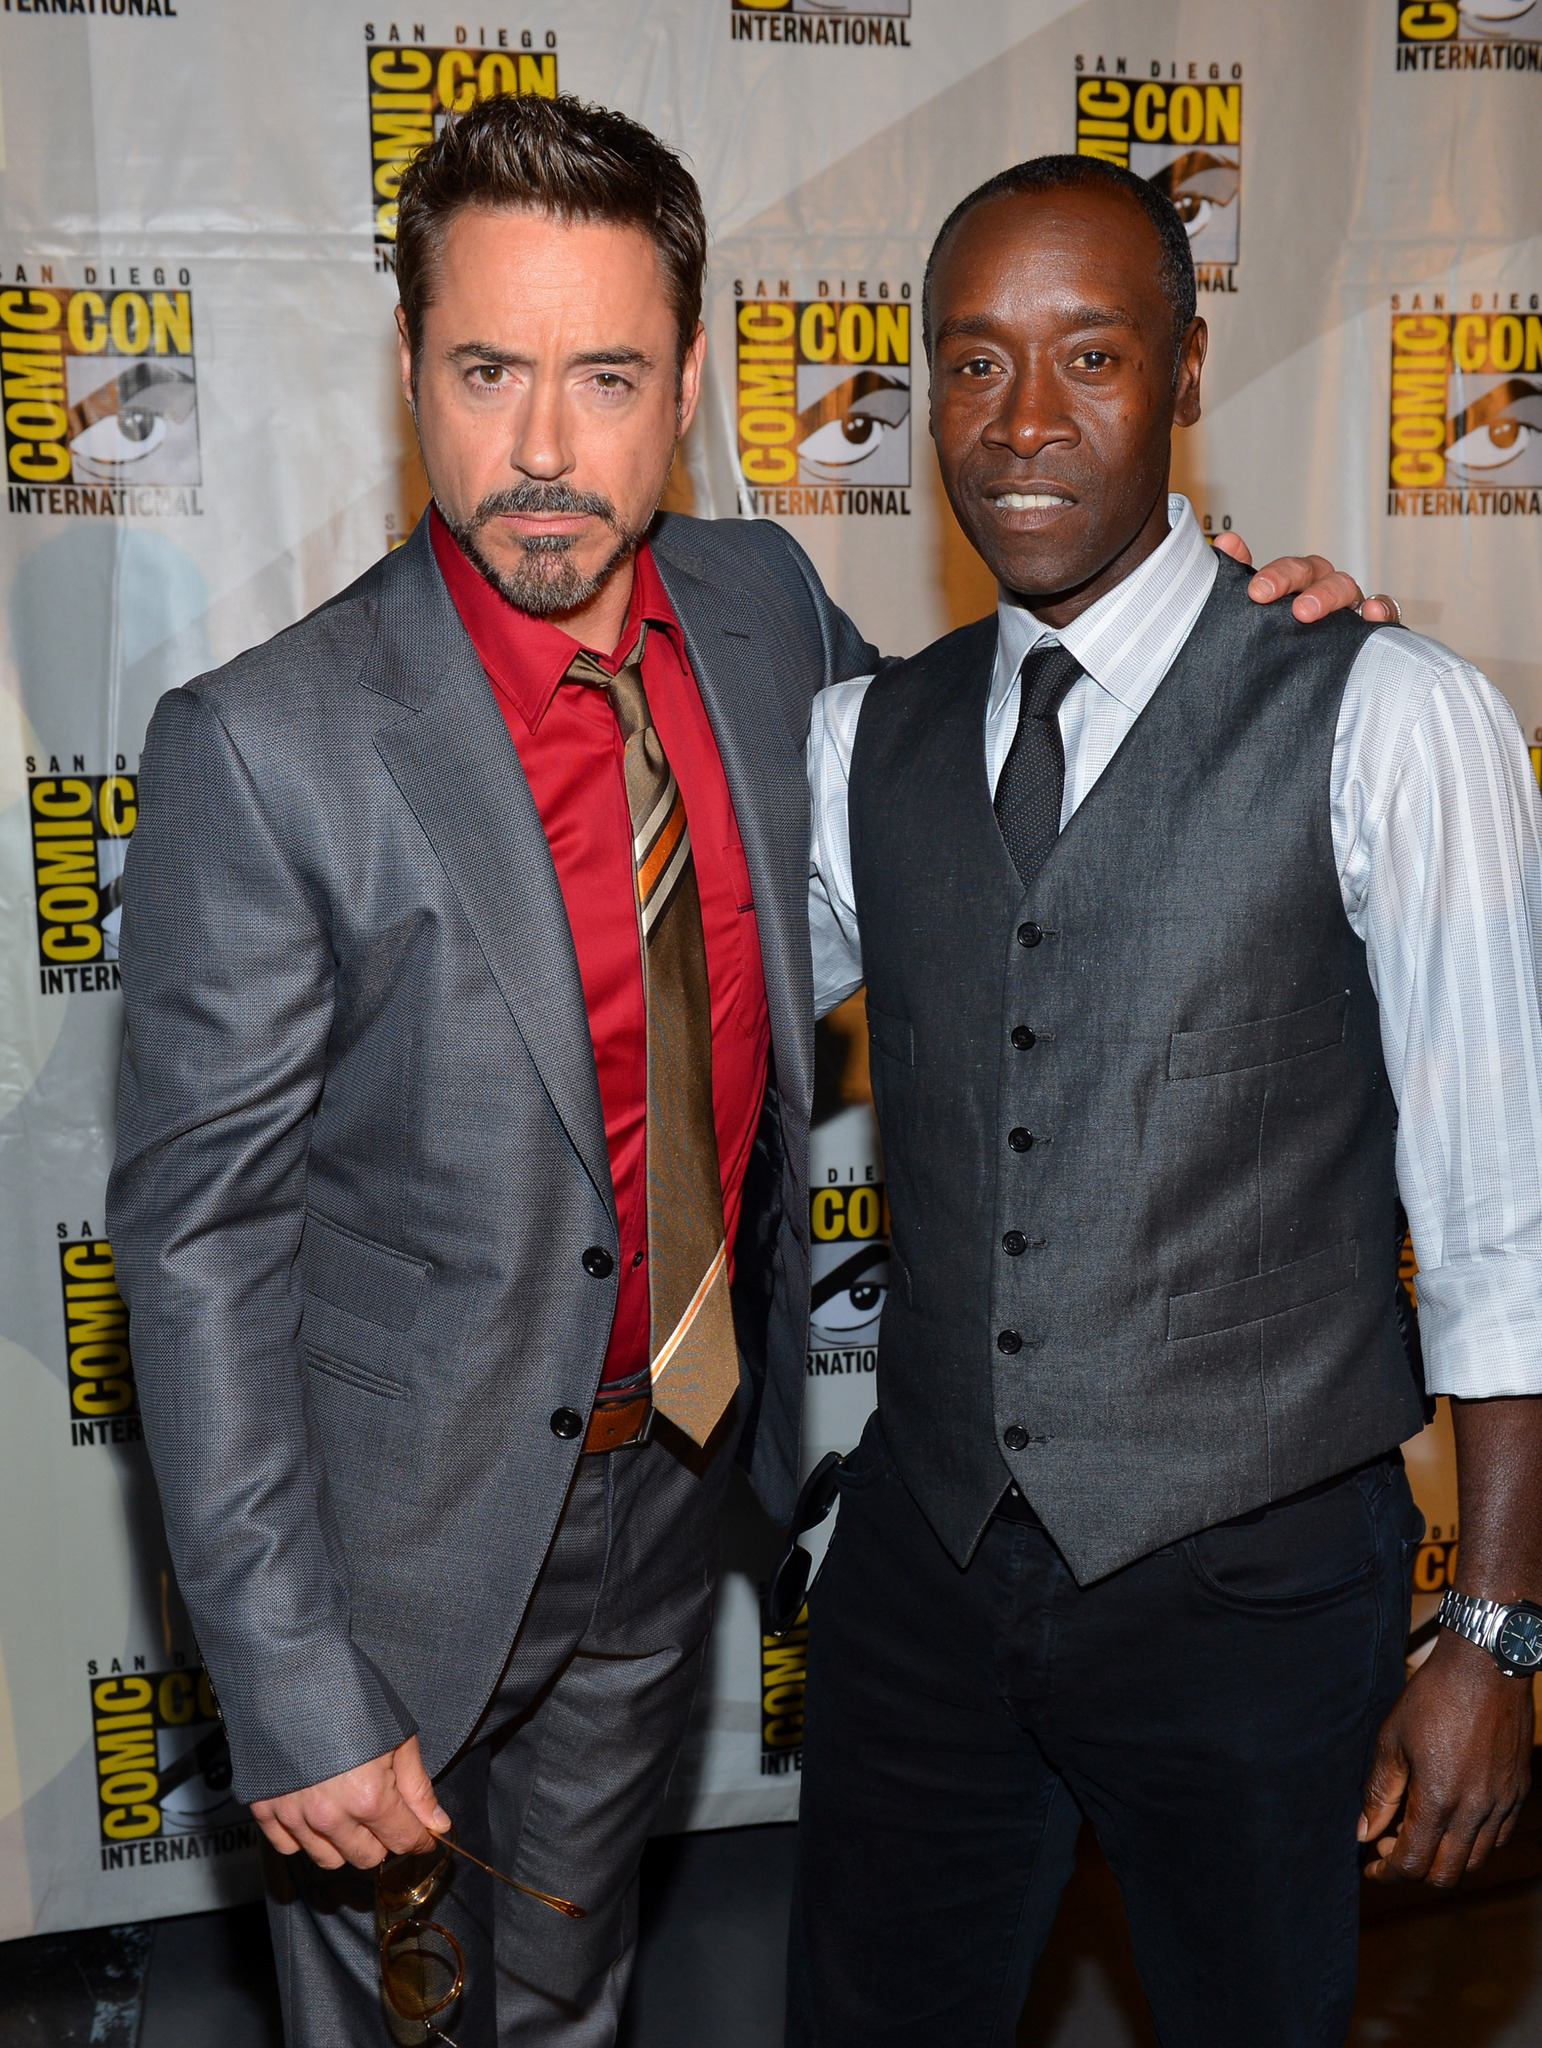 Don Cheadle and Robert Downey Jr. at event of Gelezinis zmogus 3 (2013)